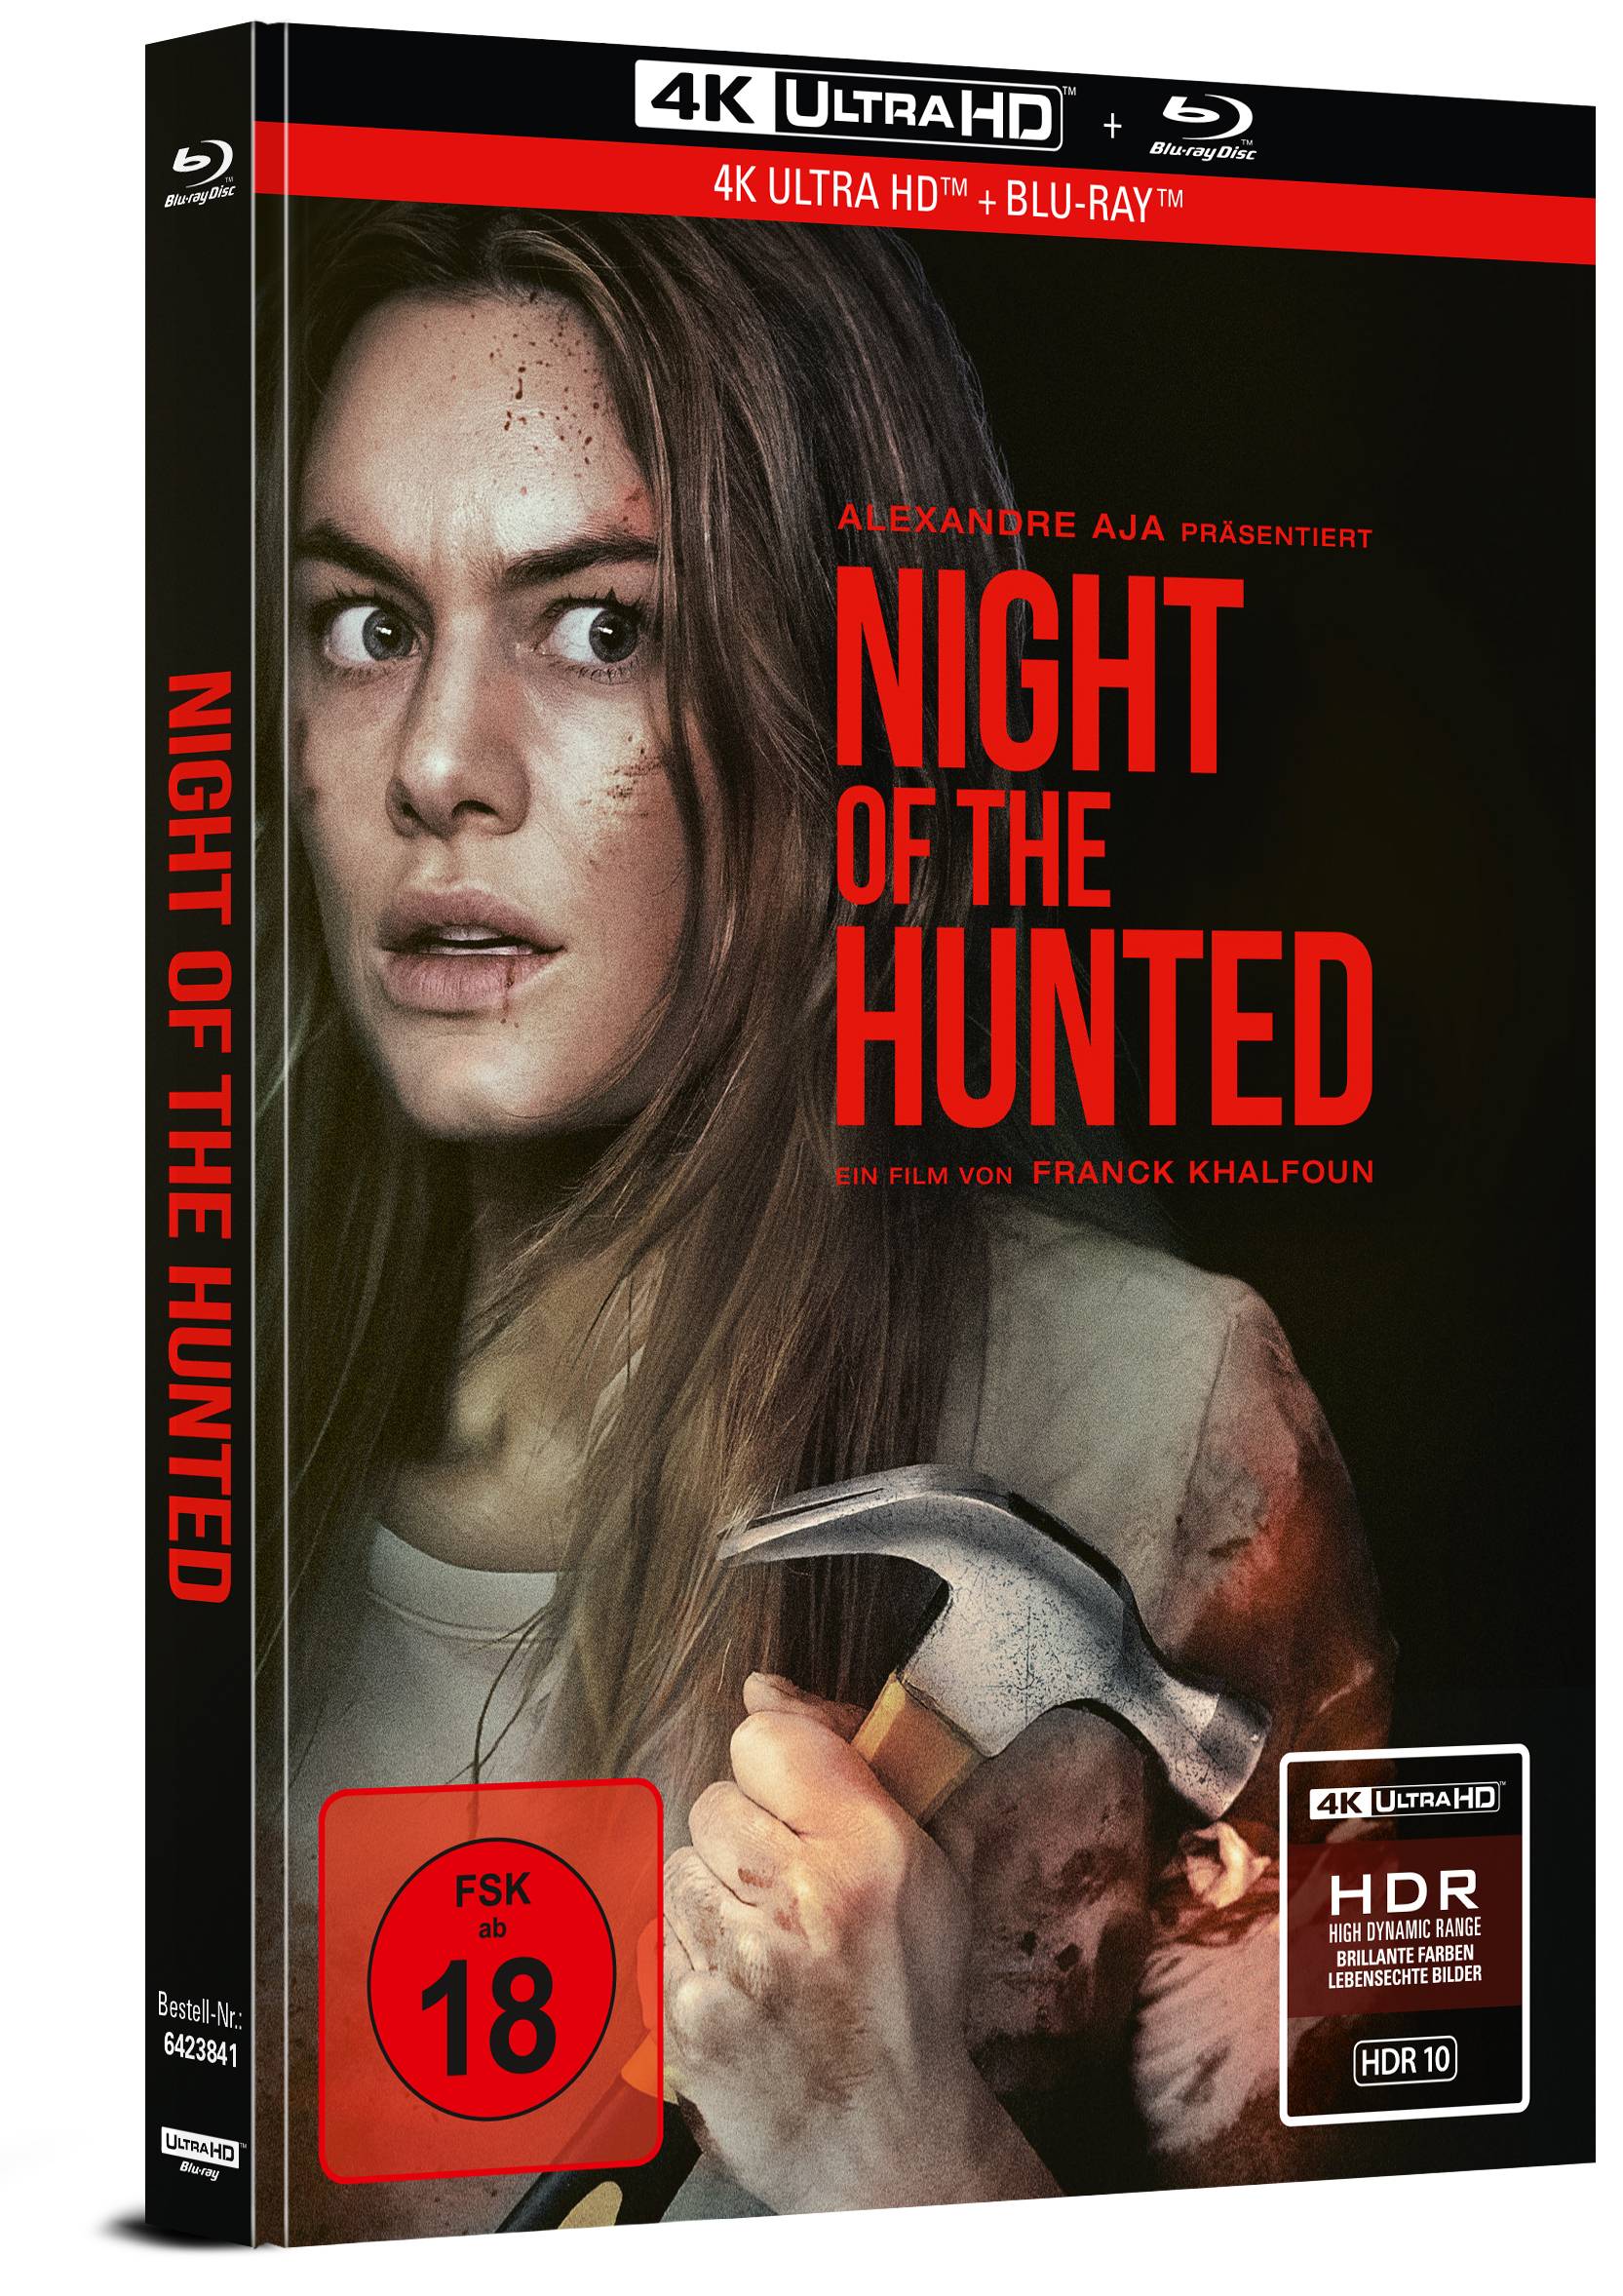 Night of the Hunted - 2-Disc Limited Collector's Edition im Mediabook (UHD-Blu-ray + Blu-ray)